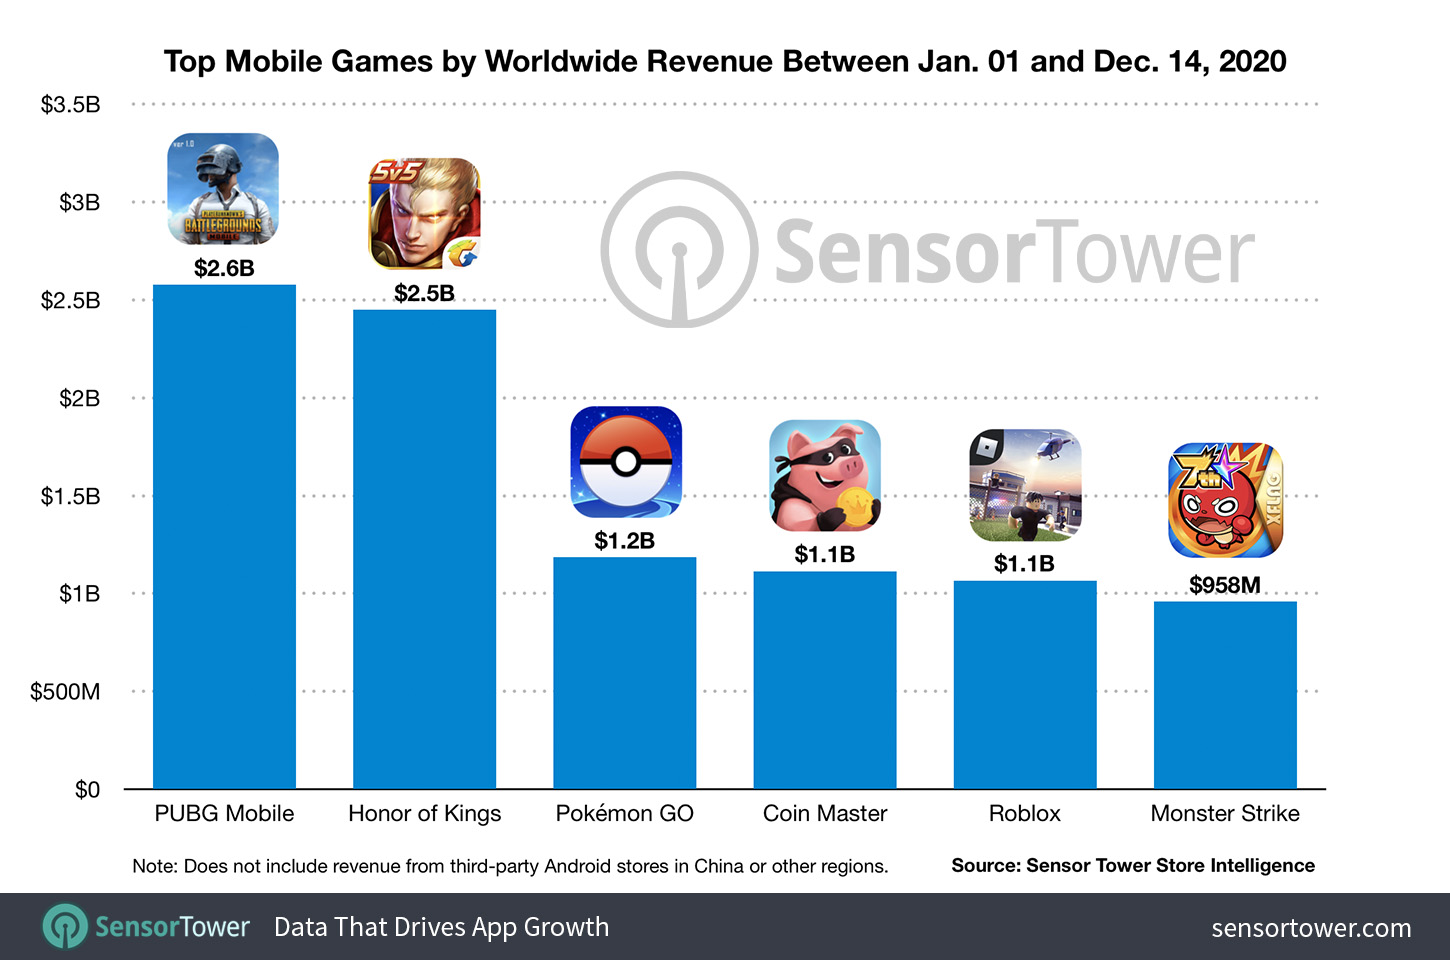 Top Mobile Games By Worldwide Revenue Between January 1 to December 14 2020